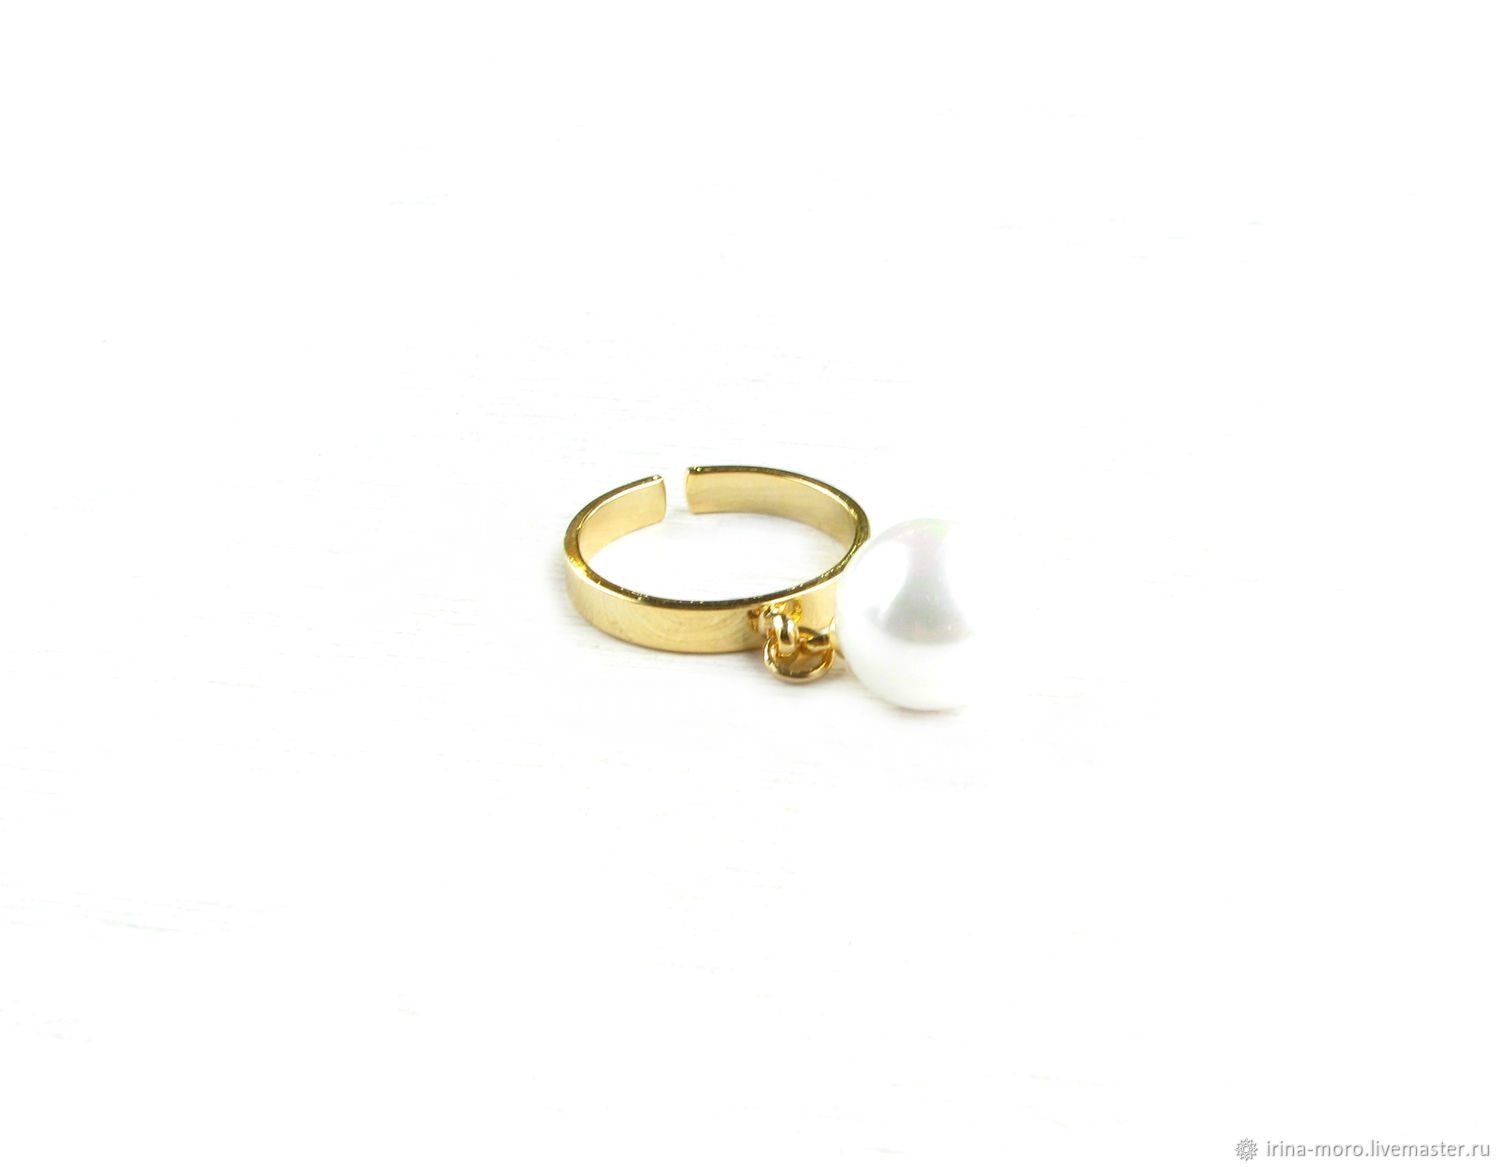 Ring with pearls, buy ring pendant, new year winter, Rings, Moscow,  Фото №1